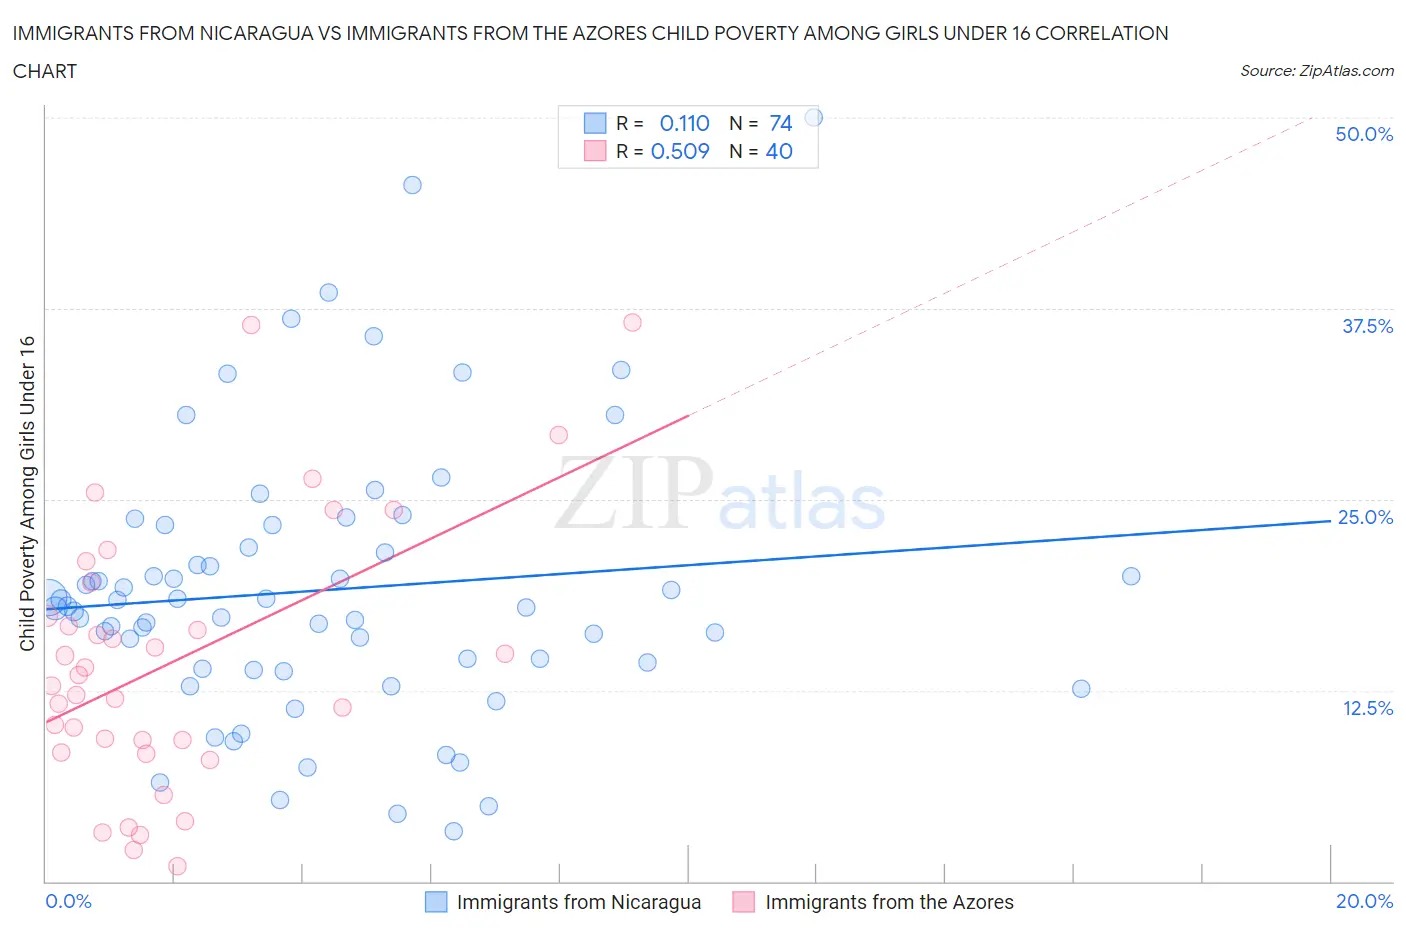 Immigrants from Nicaragua vs Immigrants from the Azores Child Poverty Among Girls Under 16